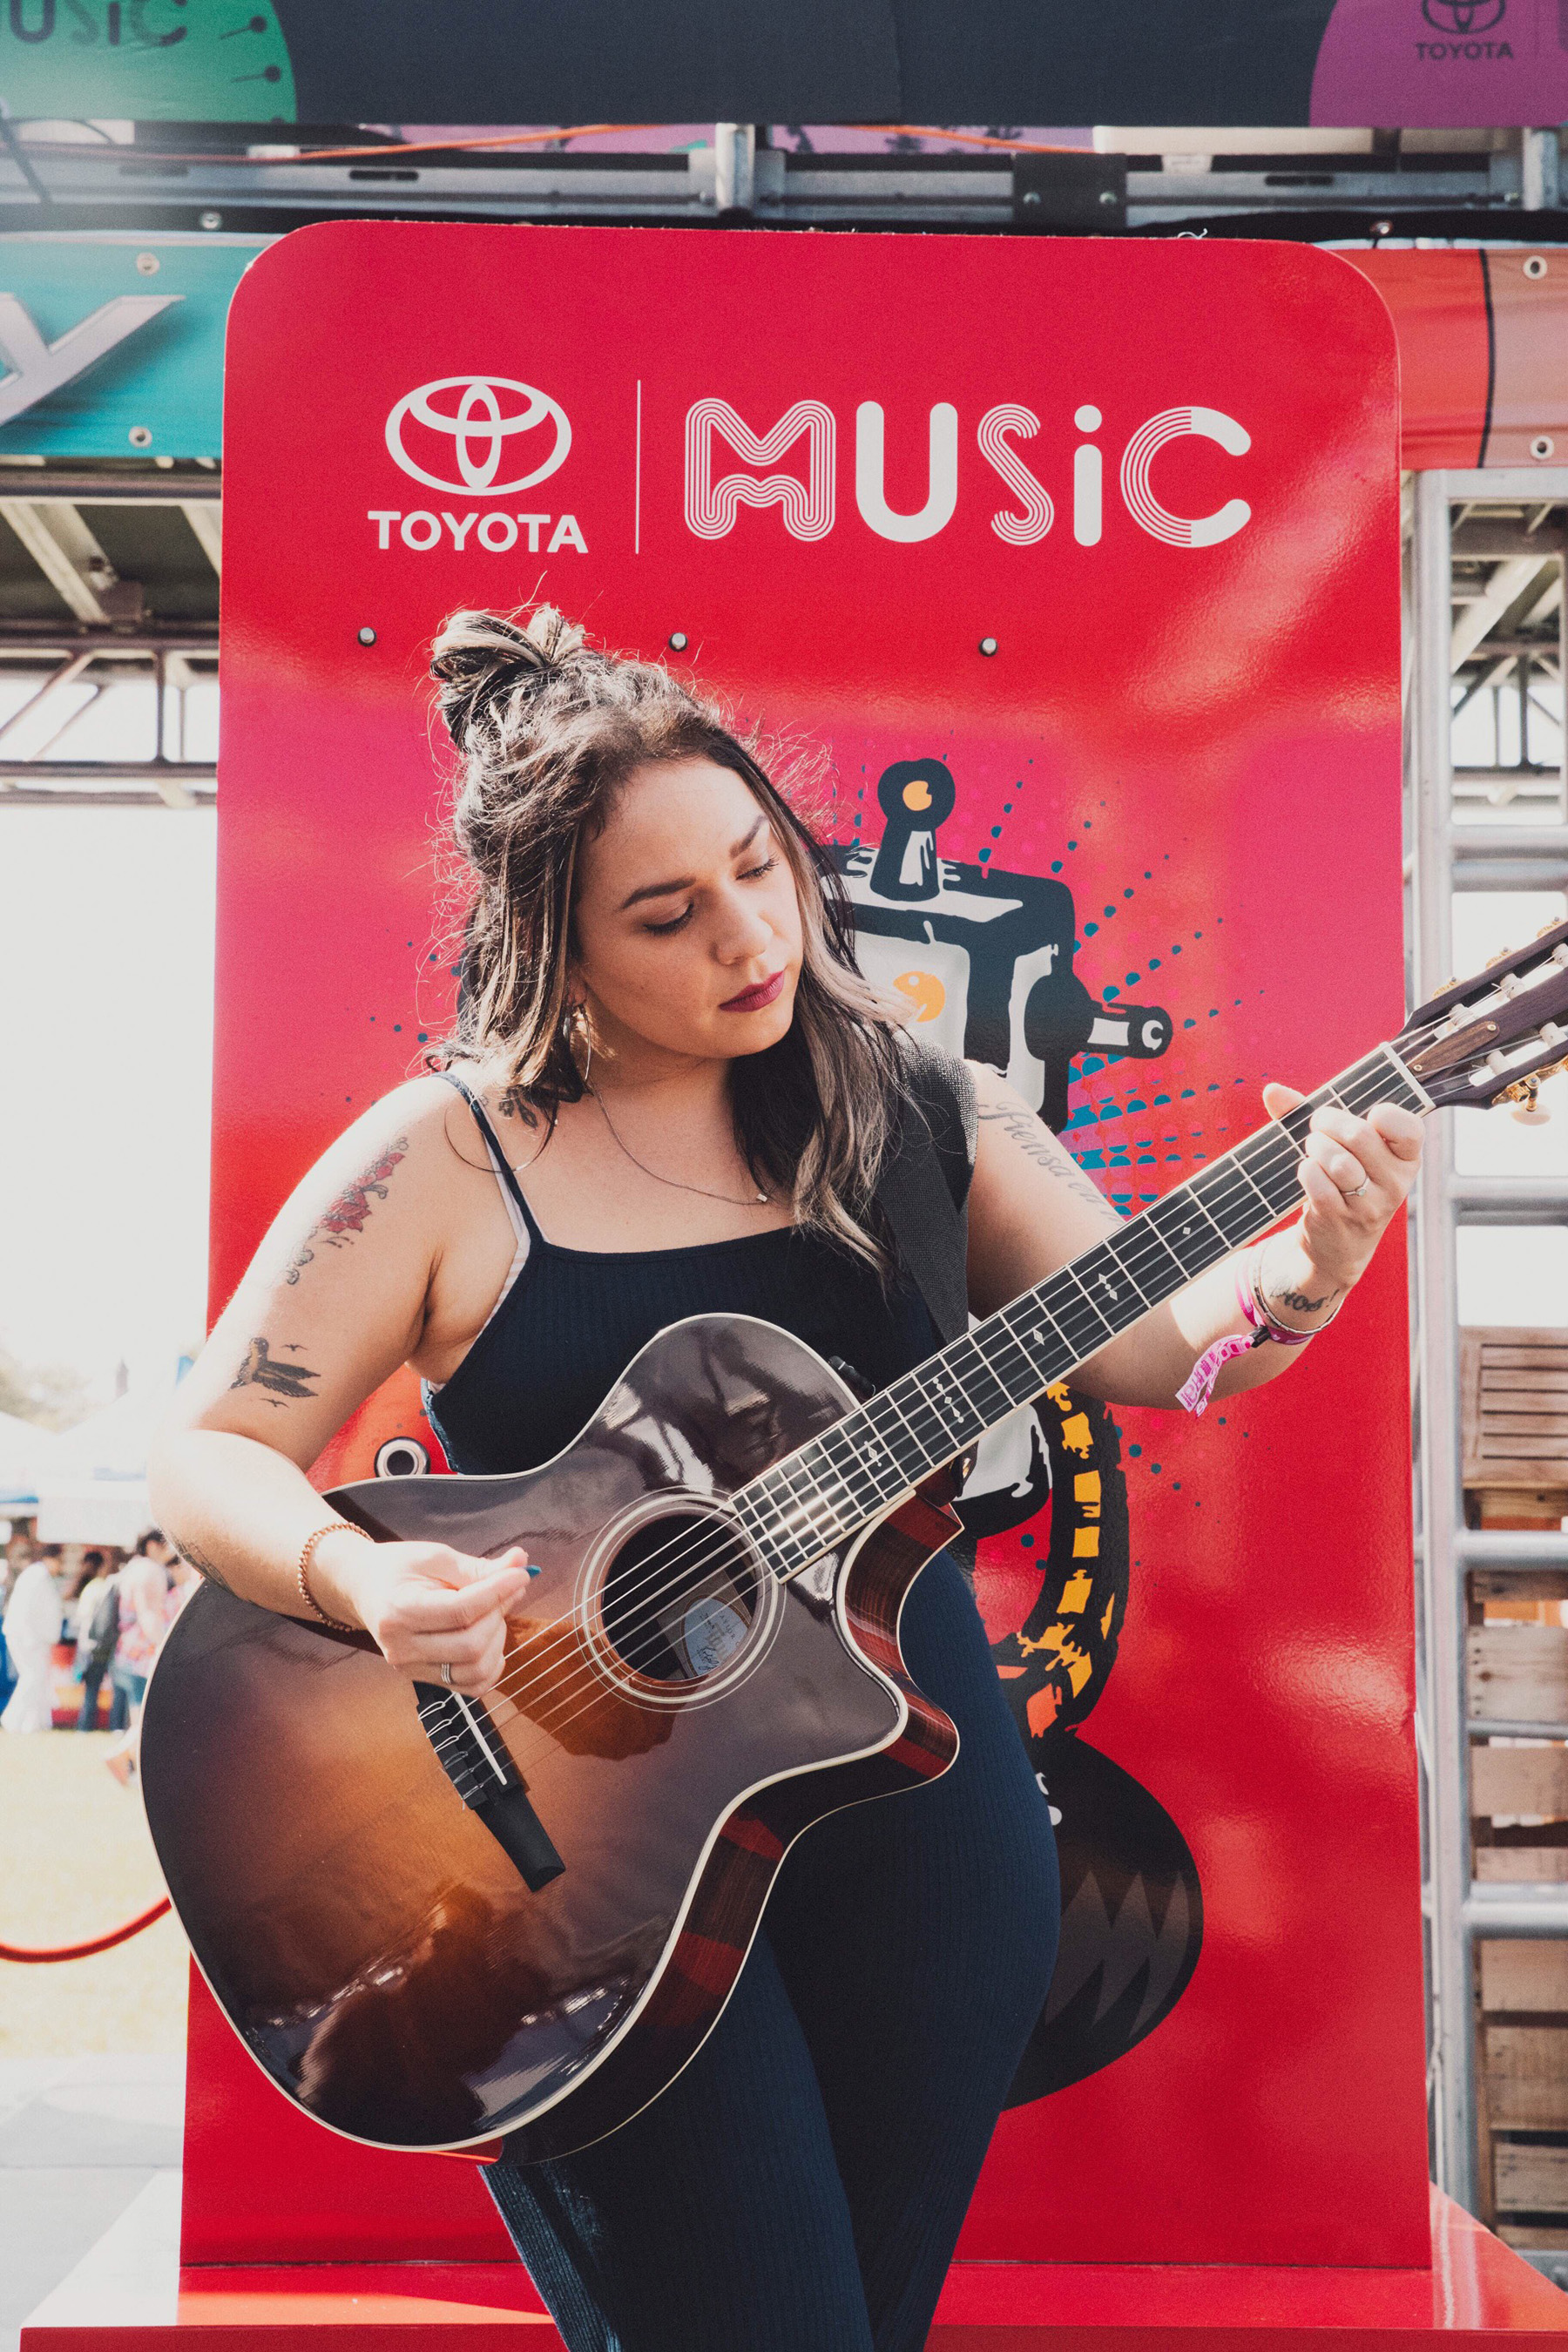 Singer and composer, Carla Morrison, strums a note at the Toyota Música tent before her performance on Friday, July 8 during Ruido Fest 2016 in Chicago.